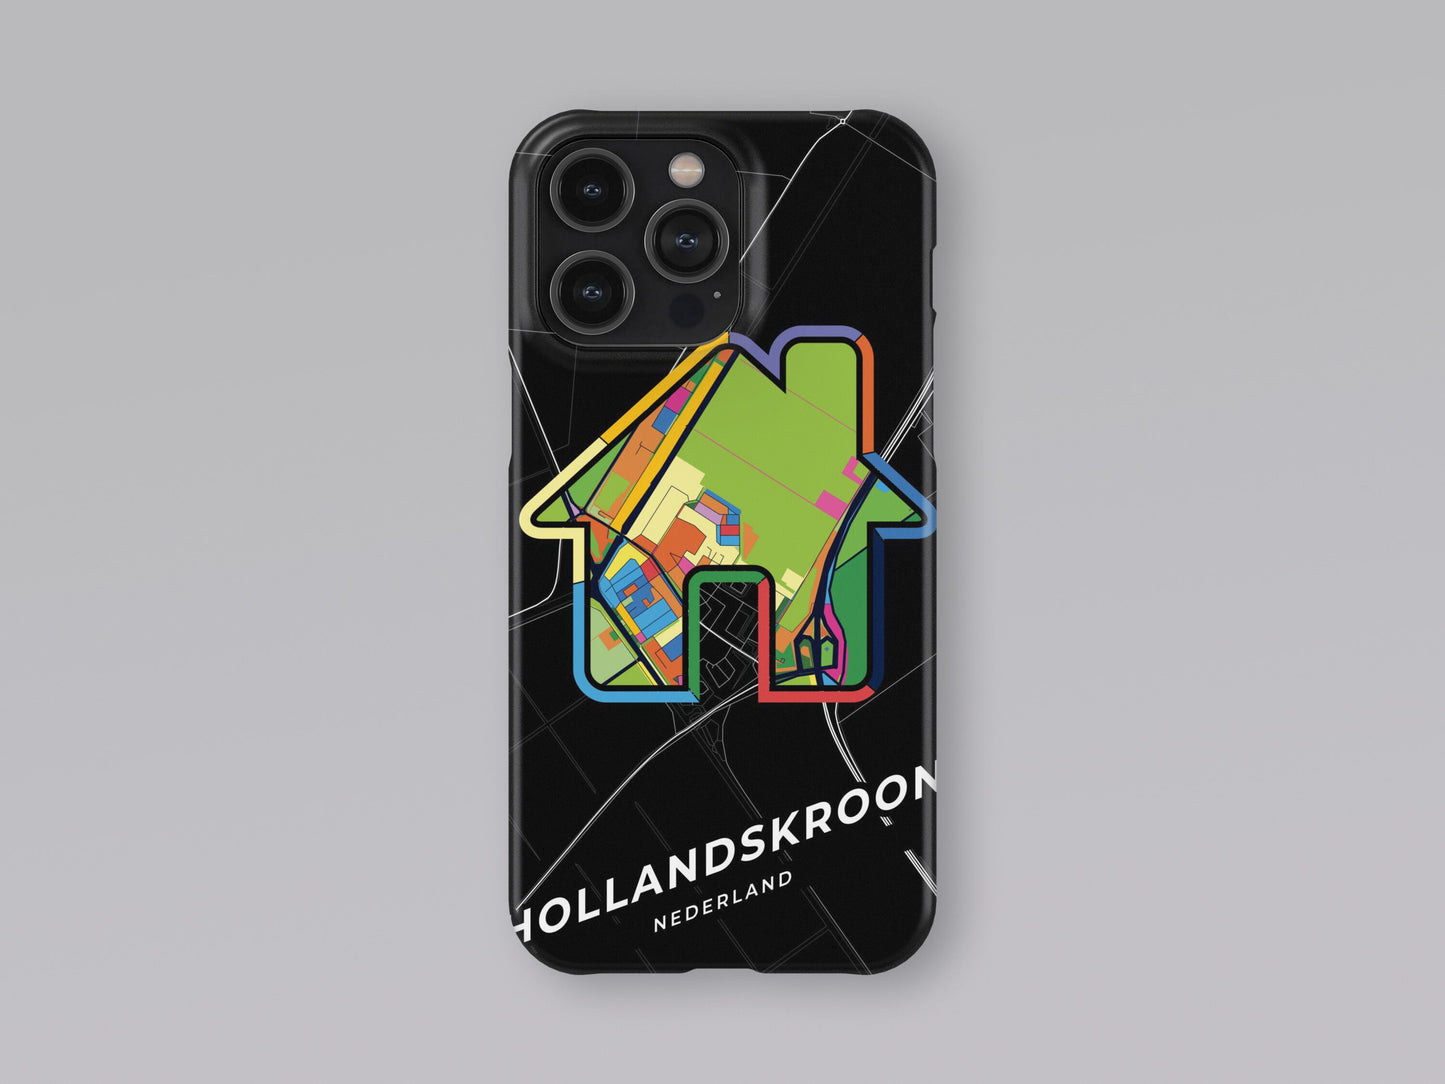 Hollands Kroon Netherlands slim phone case with colorful icon. Birthday, wedding or housewarming gift. Couple match cases. 3